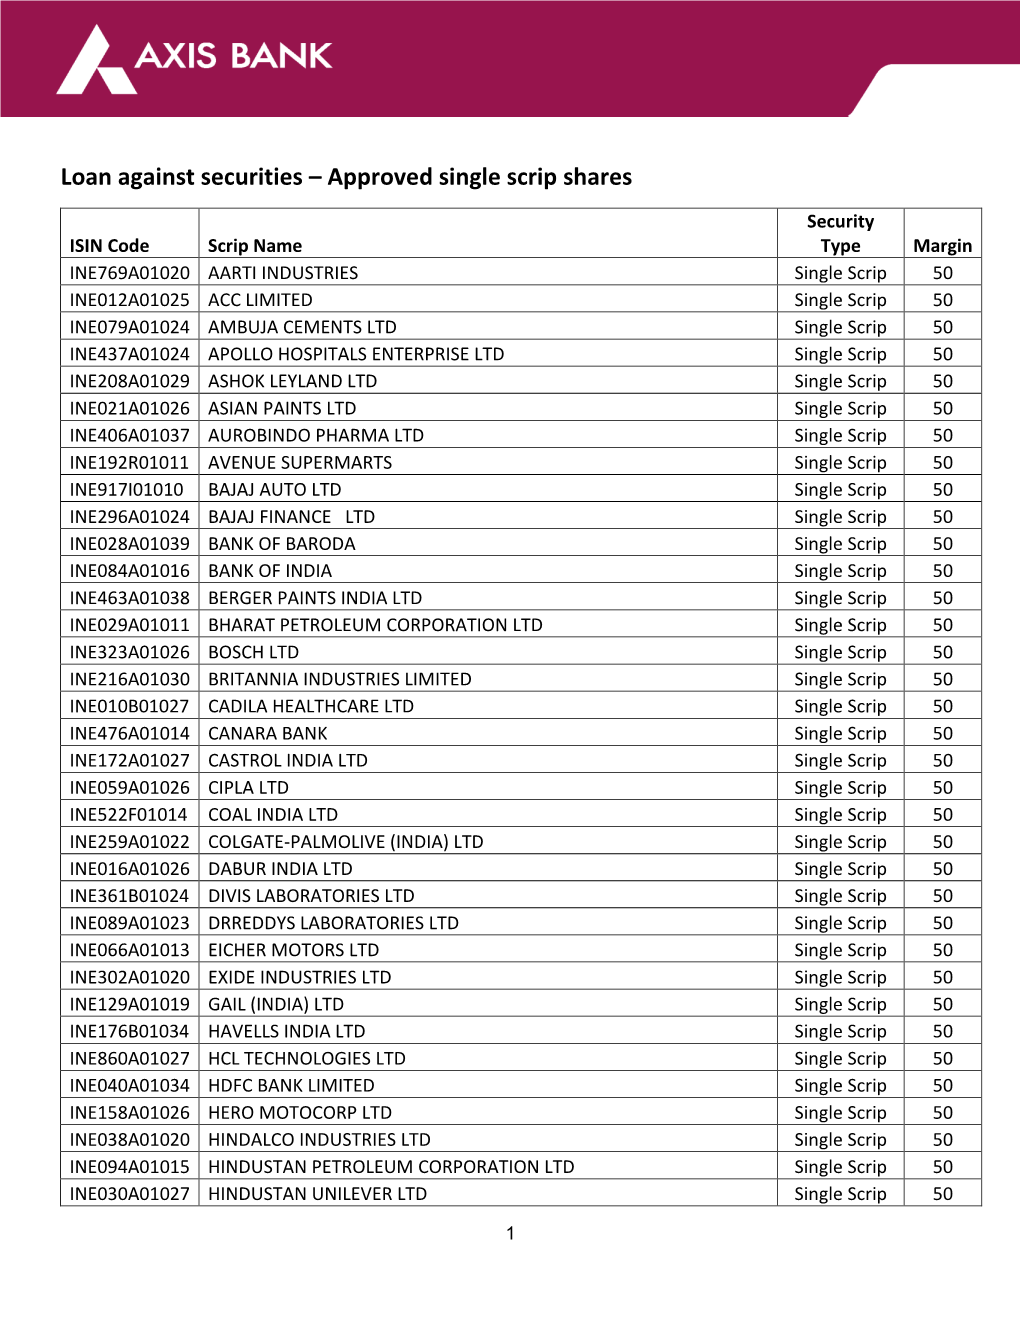 Loan Against Securities – Approved Single Scrip Shares